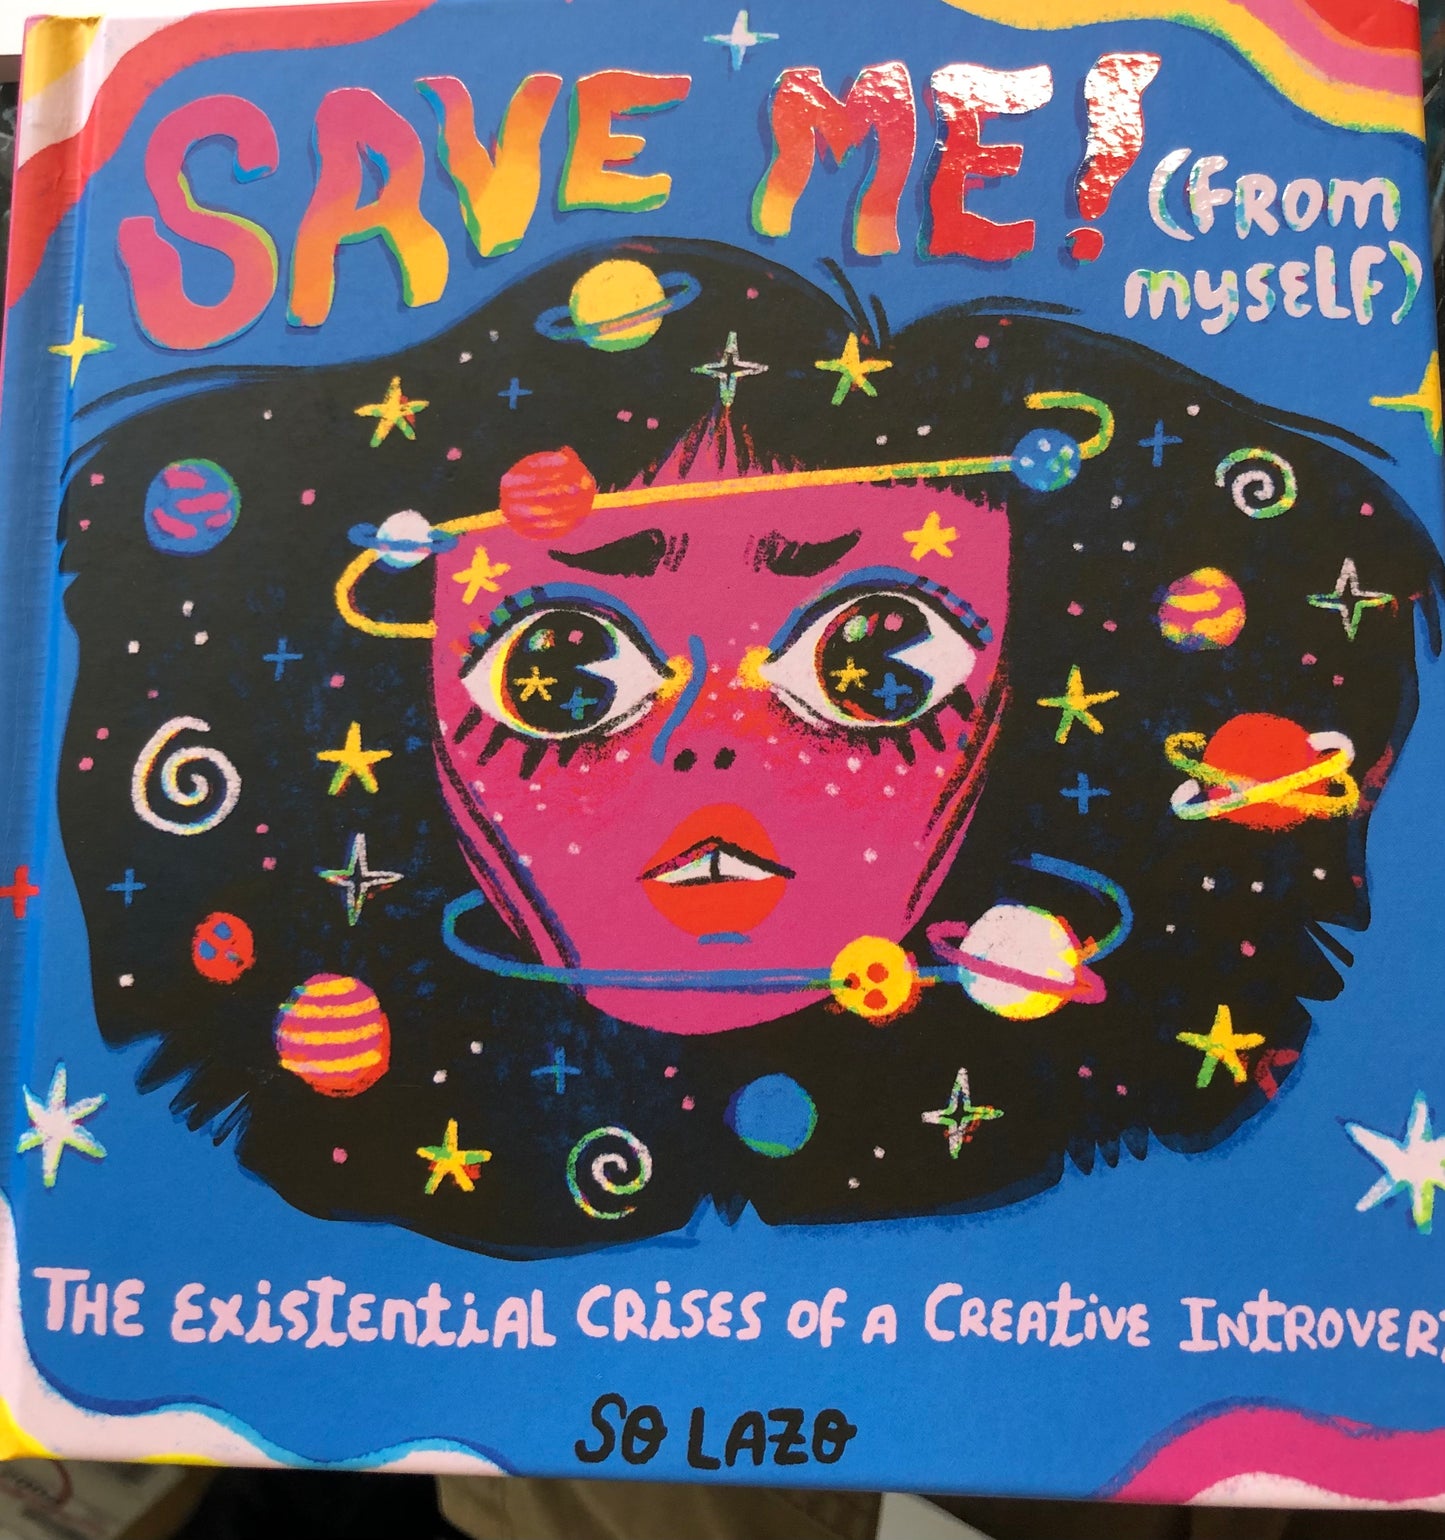 Save Me! (from myself): The Existential Crises of a Creative Introvert